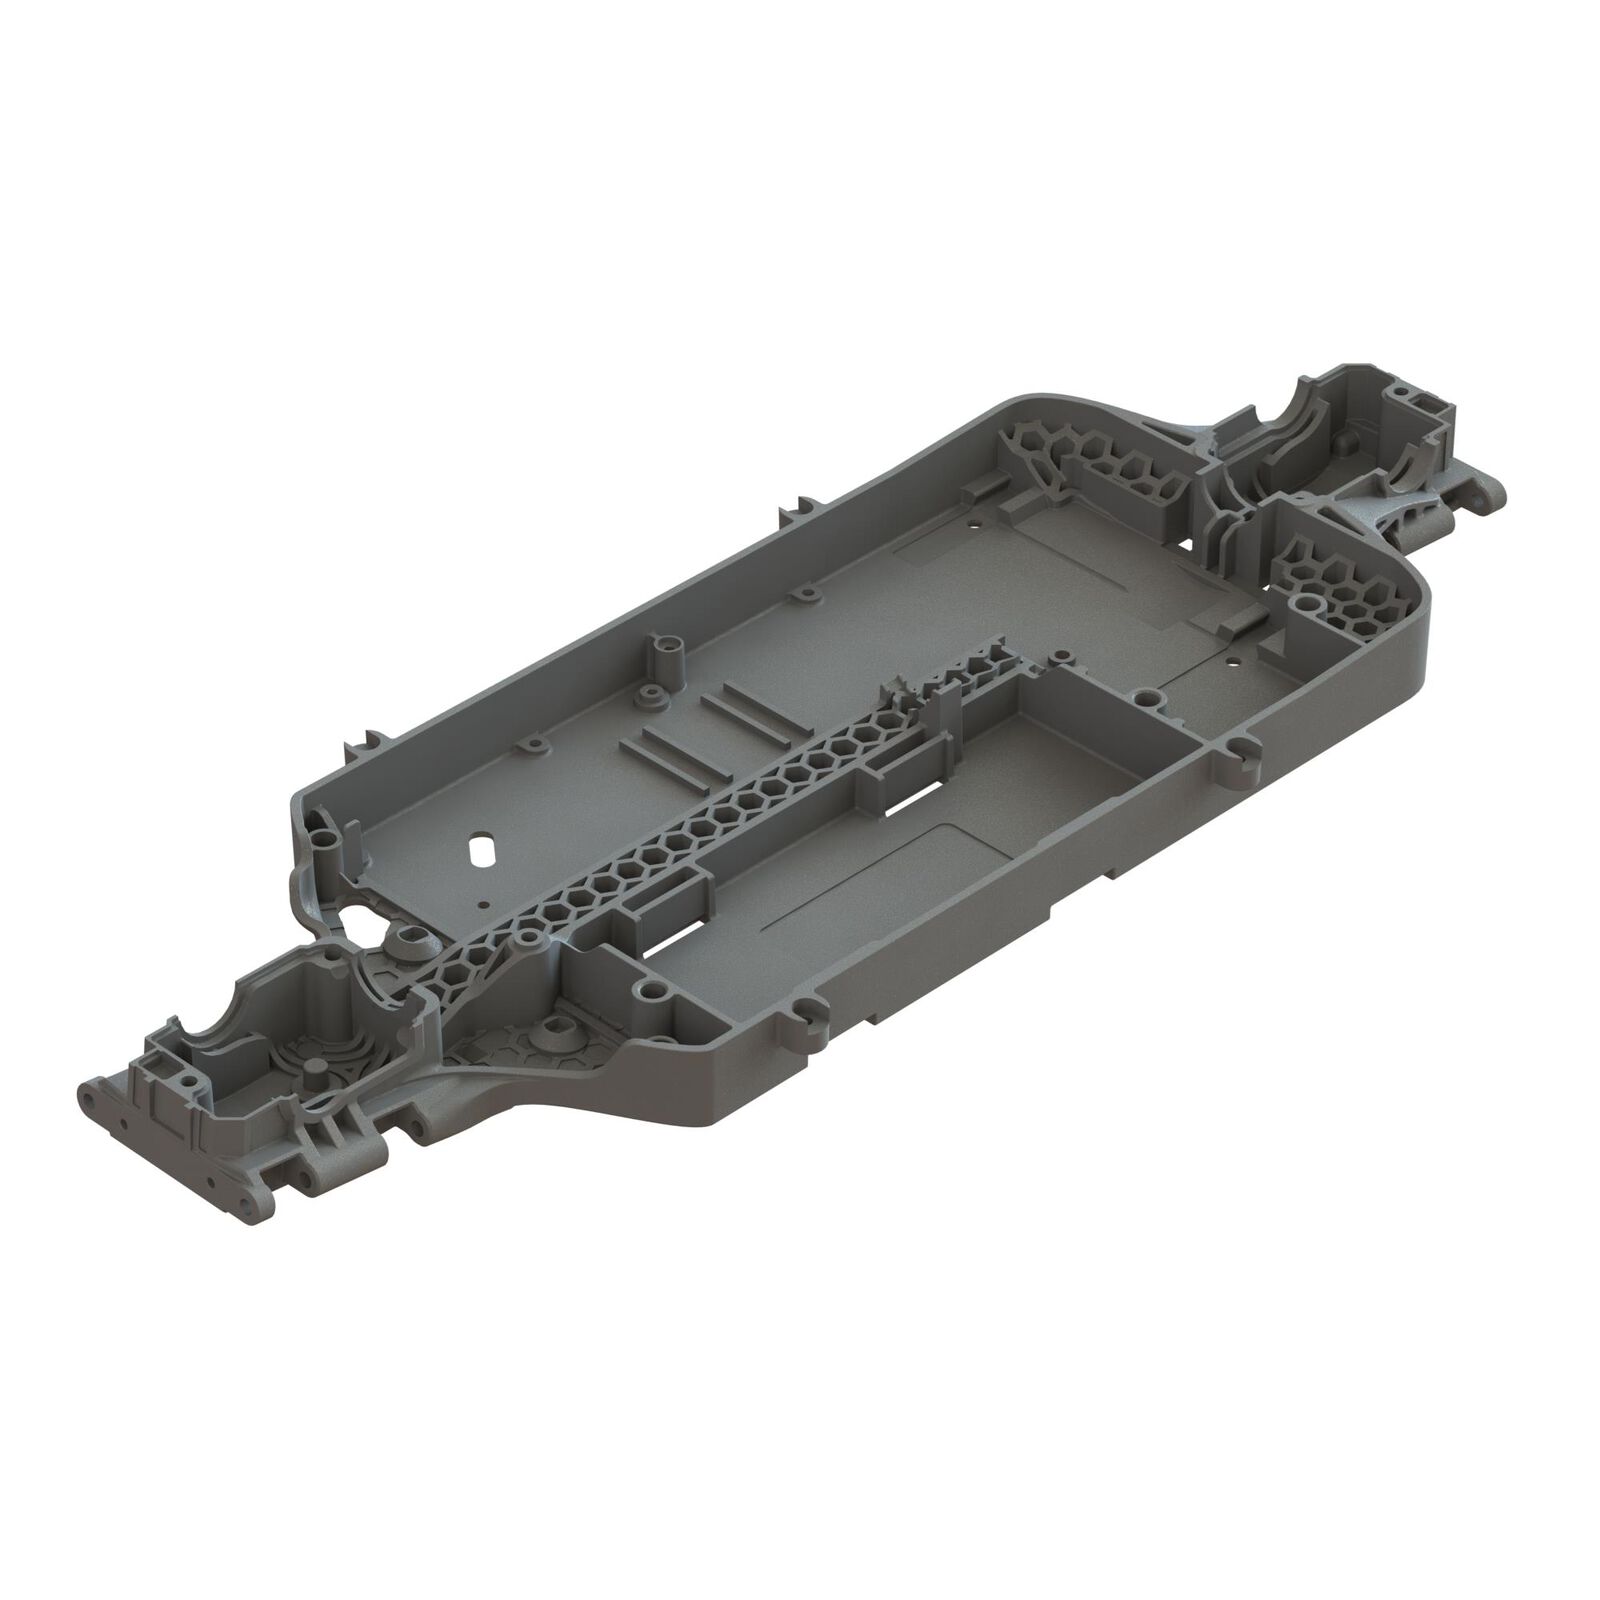 Composite Chassis - XLWB